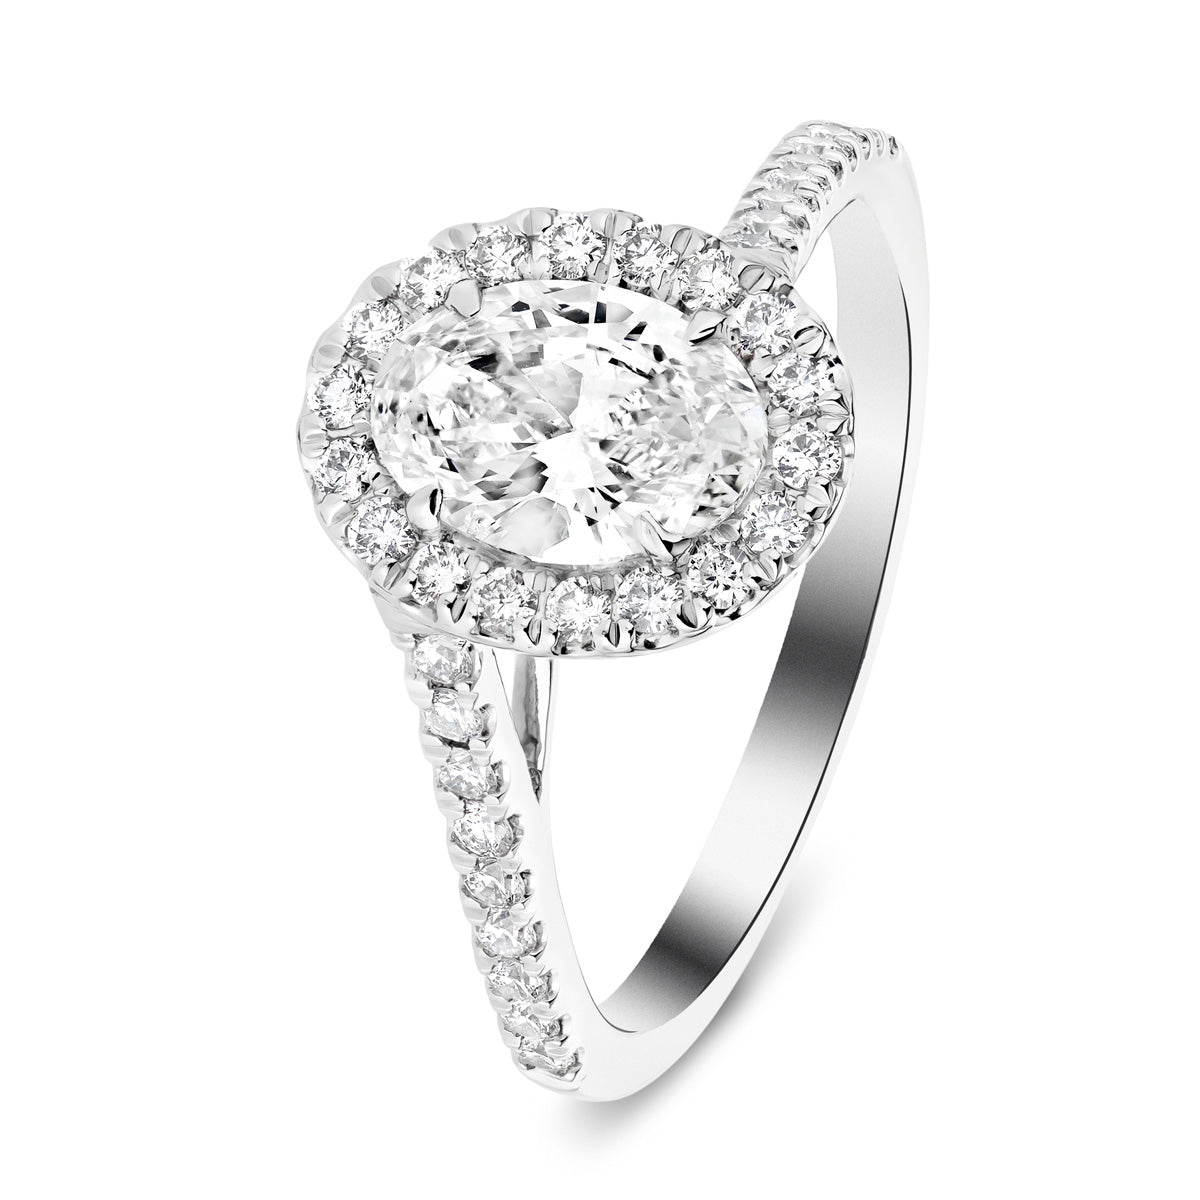 Certified Twist Oval Diamond Halo Engagement Ring 1.10ct G/SI in 18k White Gold - All Diamond